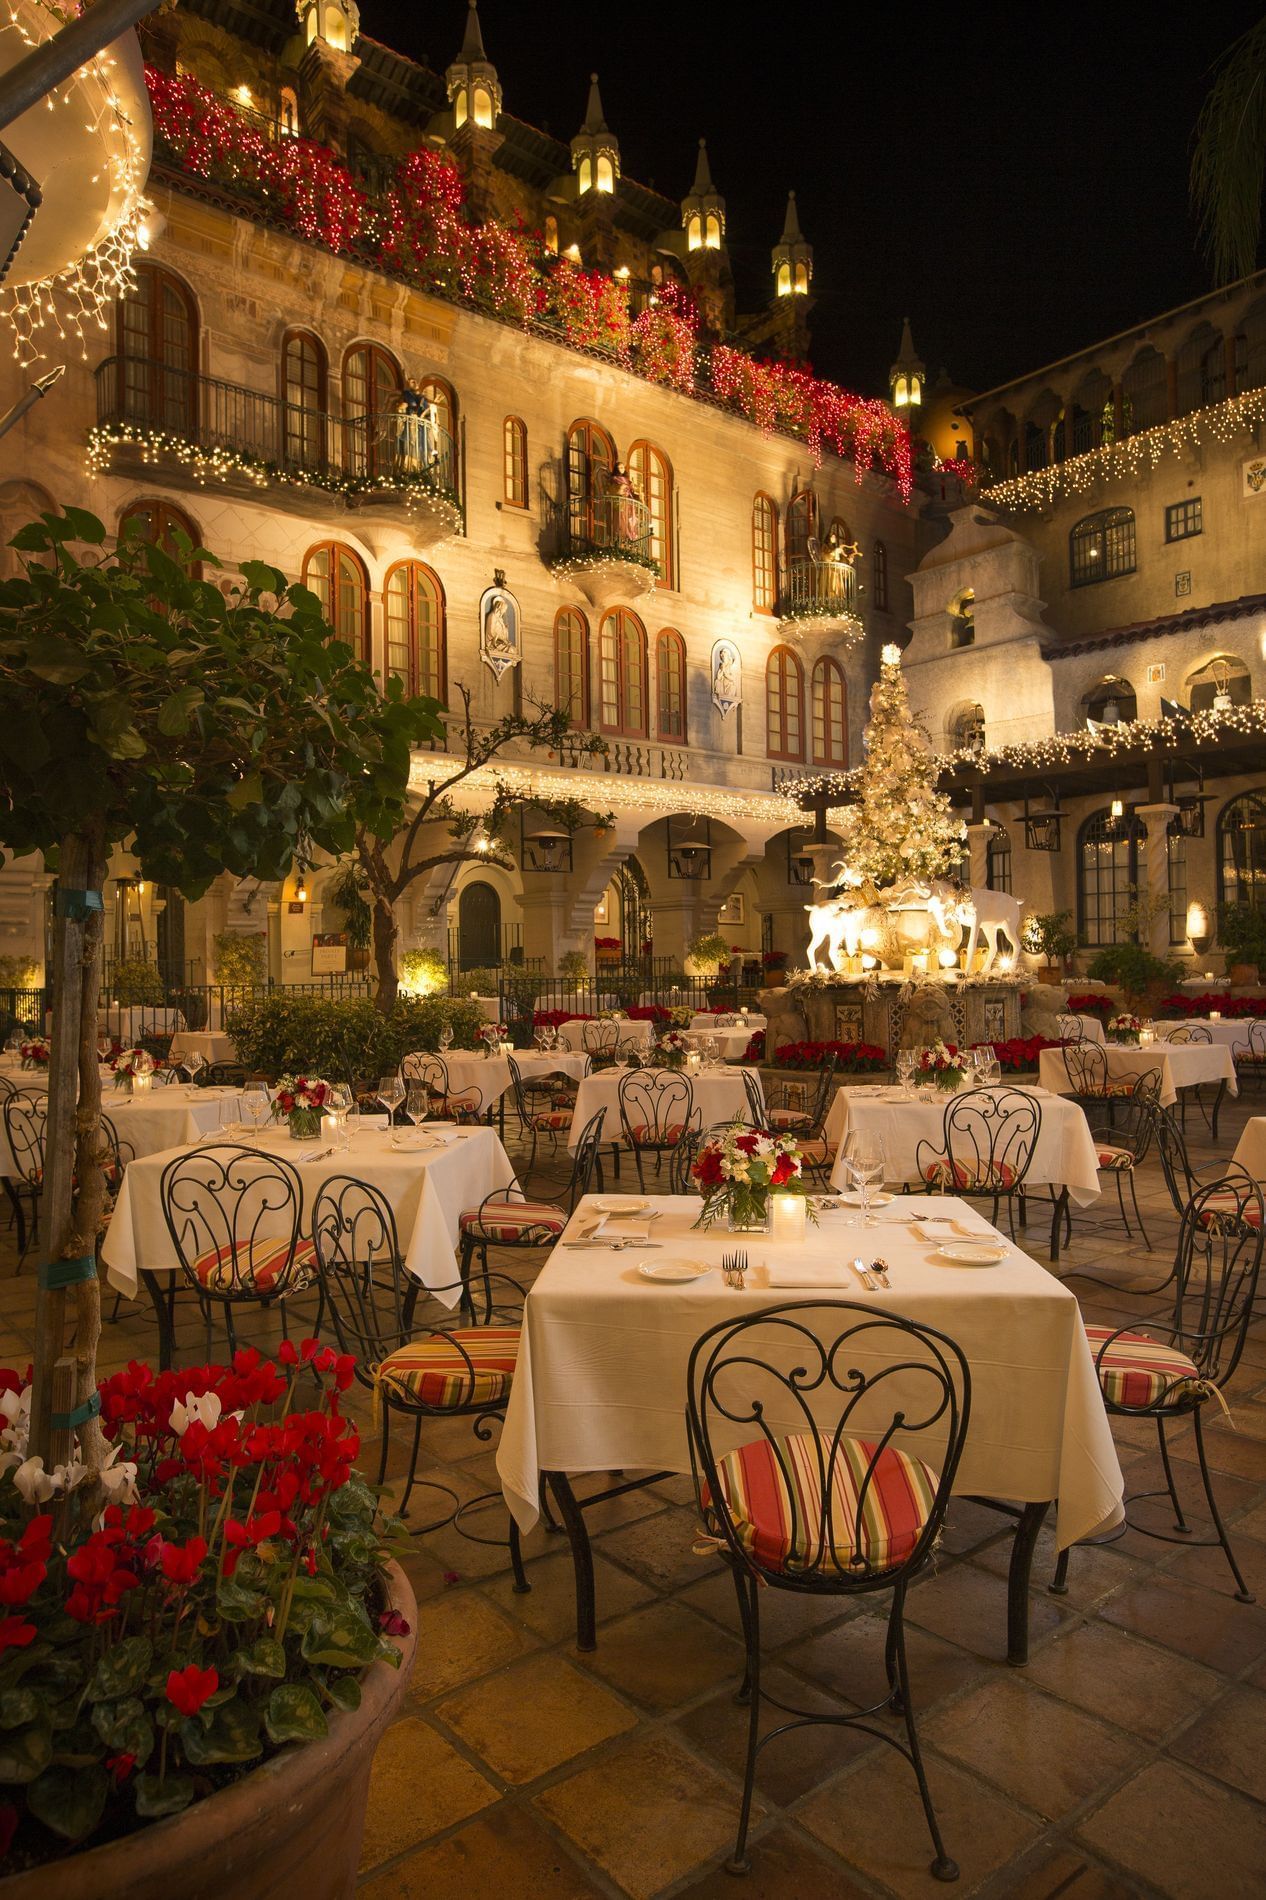 Outdoor patio with tables and chairs at Mission Inn Riverside